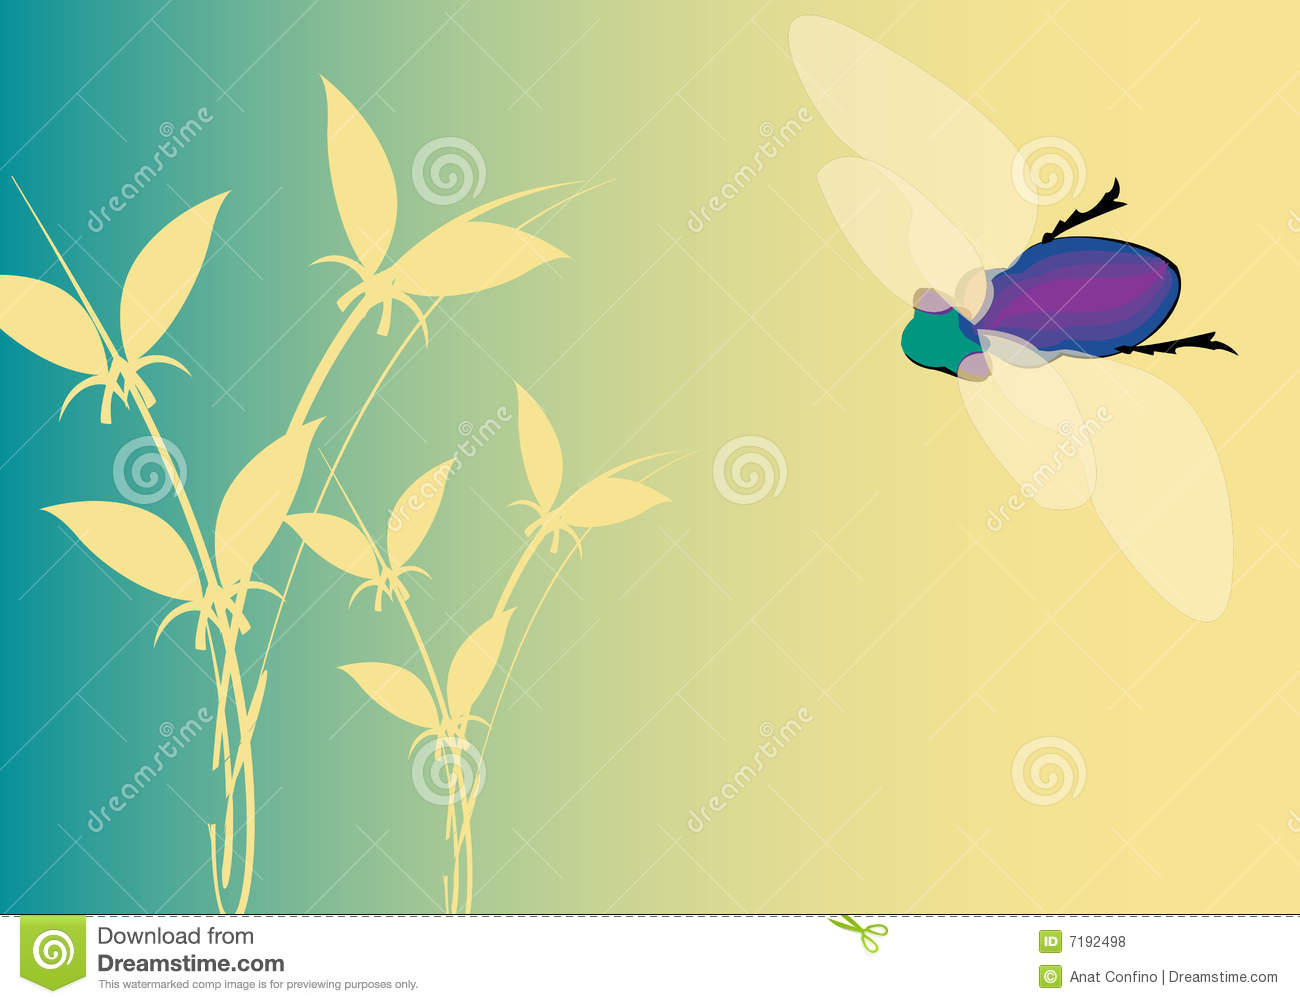 Changing Seasons Illustration With Colorful Fly And Plant On Turquoise